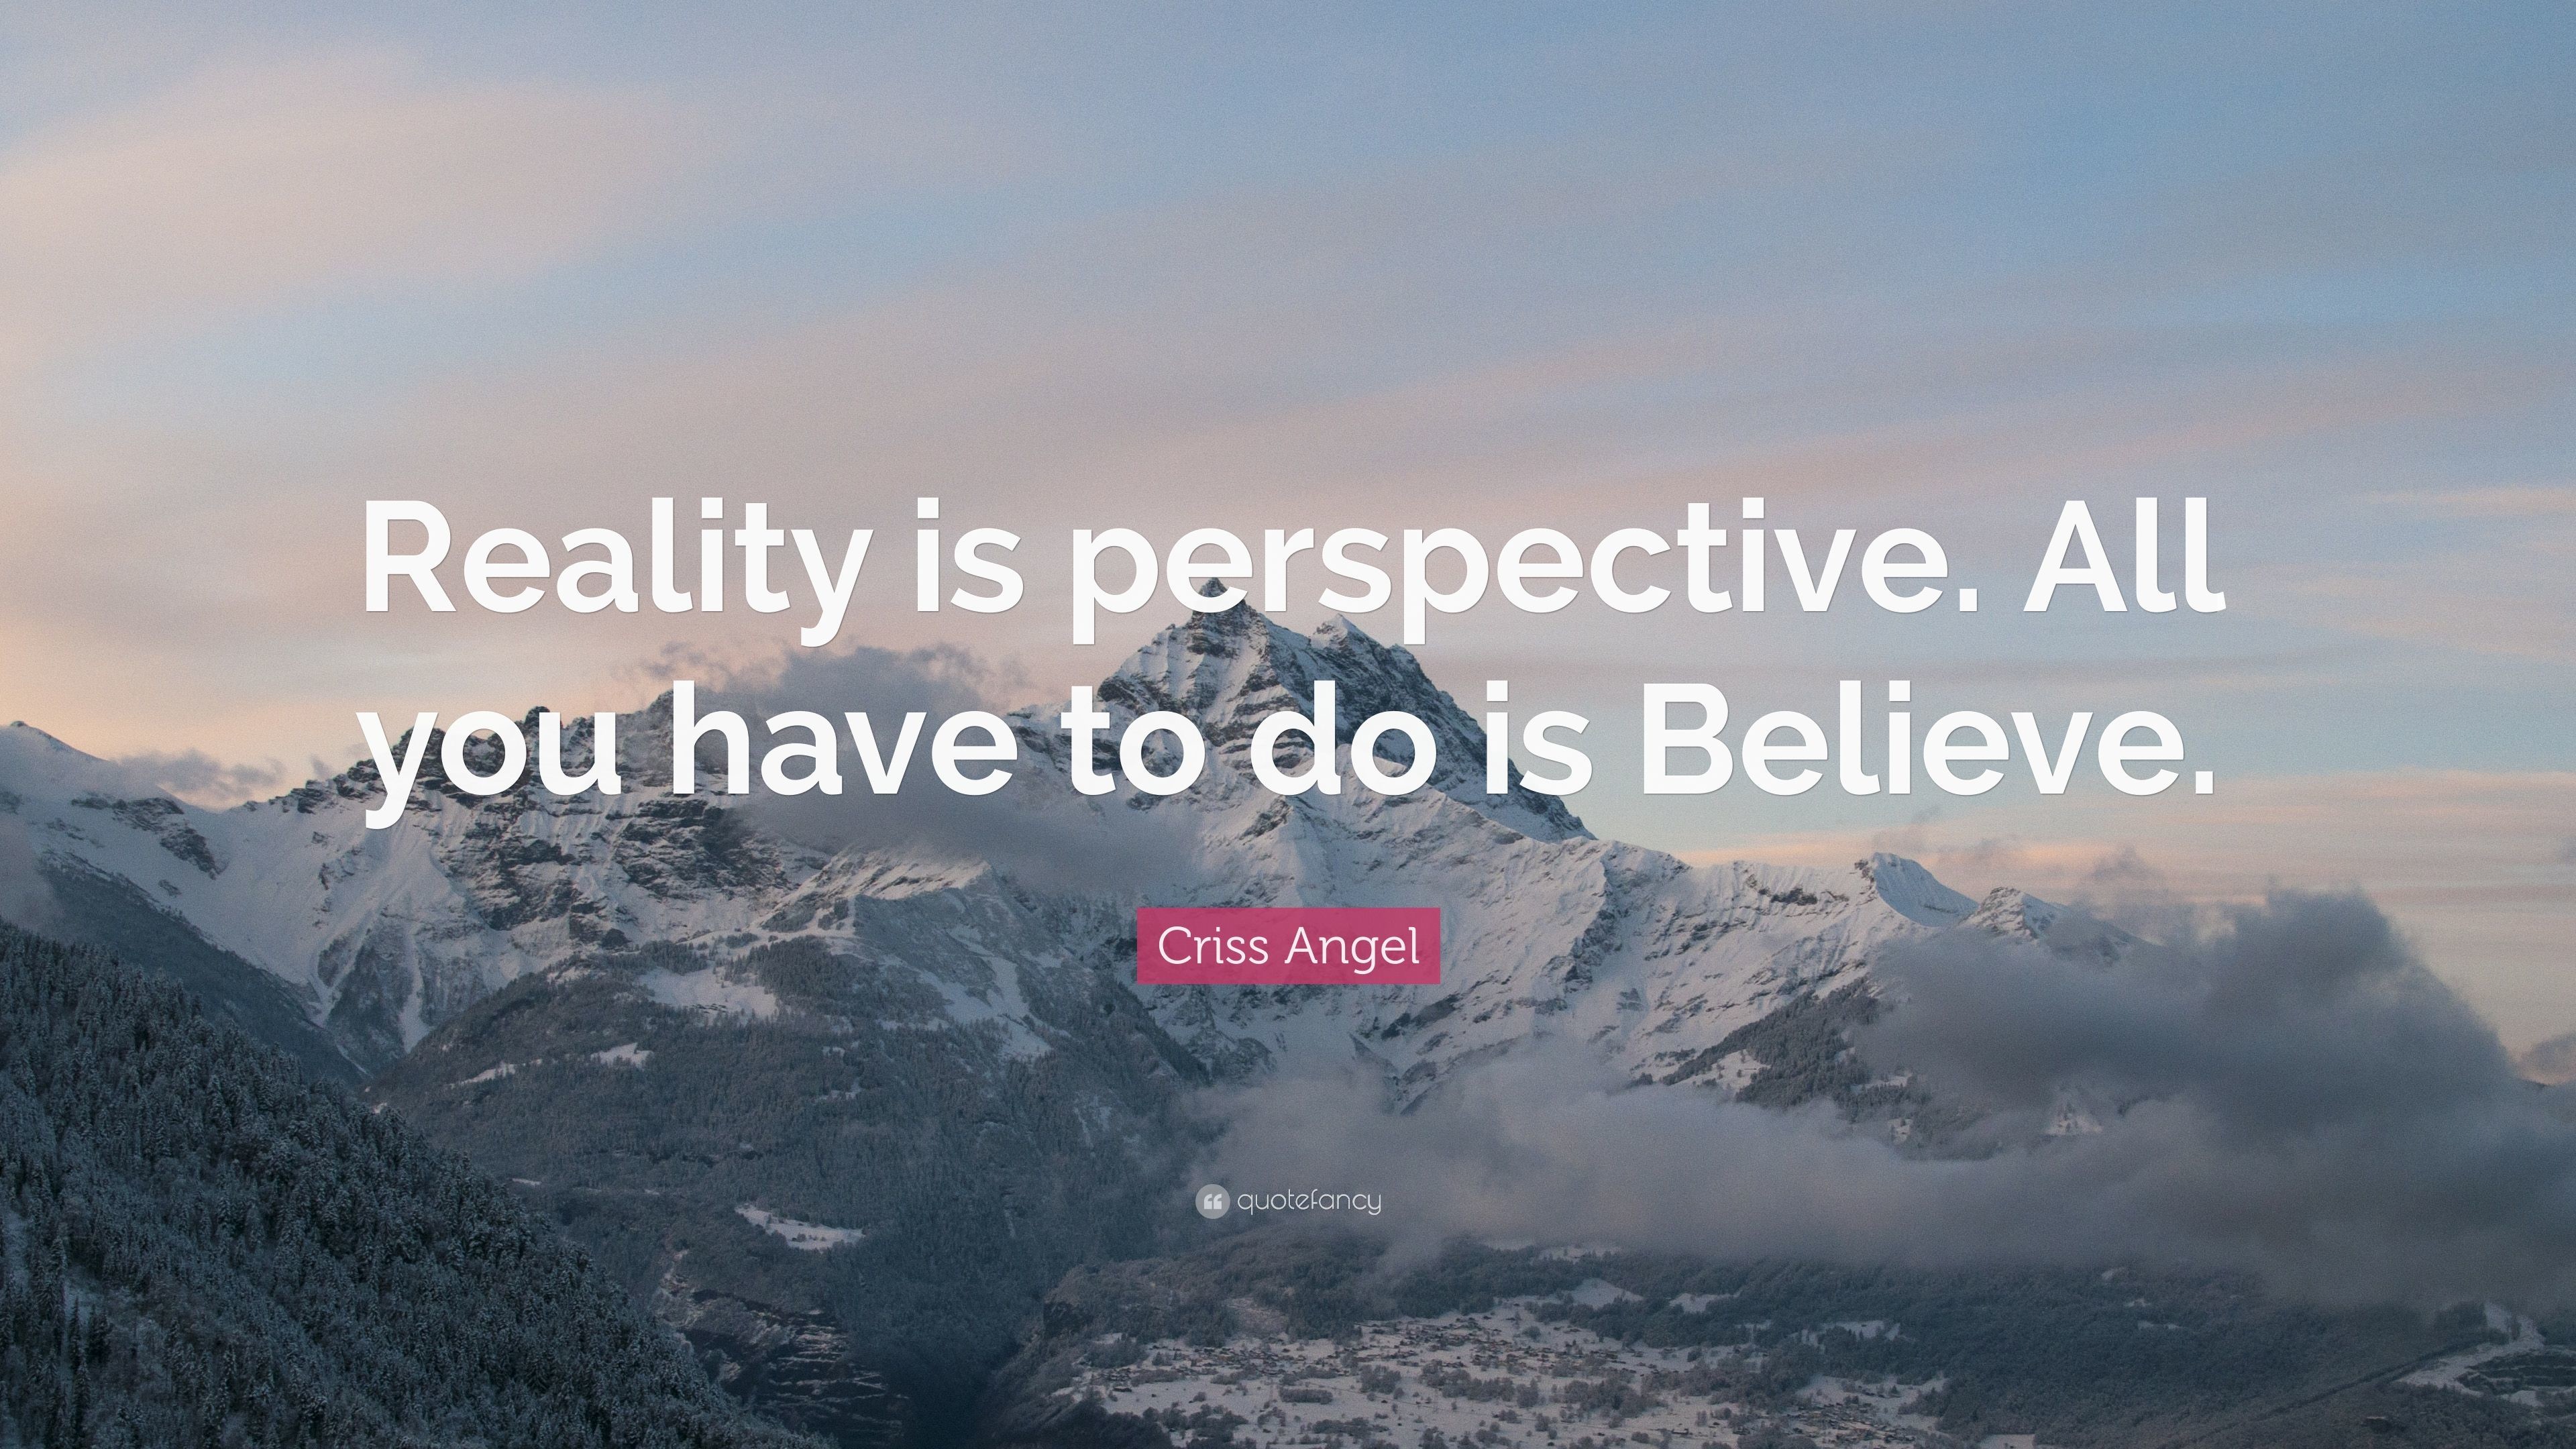 3840x2160 Criss Angel Quote: “Reality is perspective. All you have to do is Believe